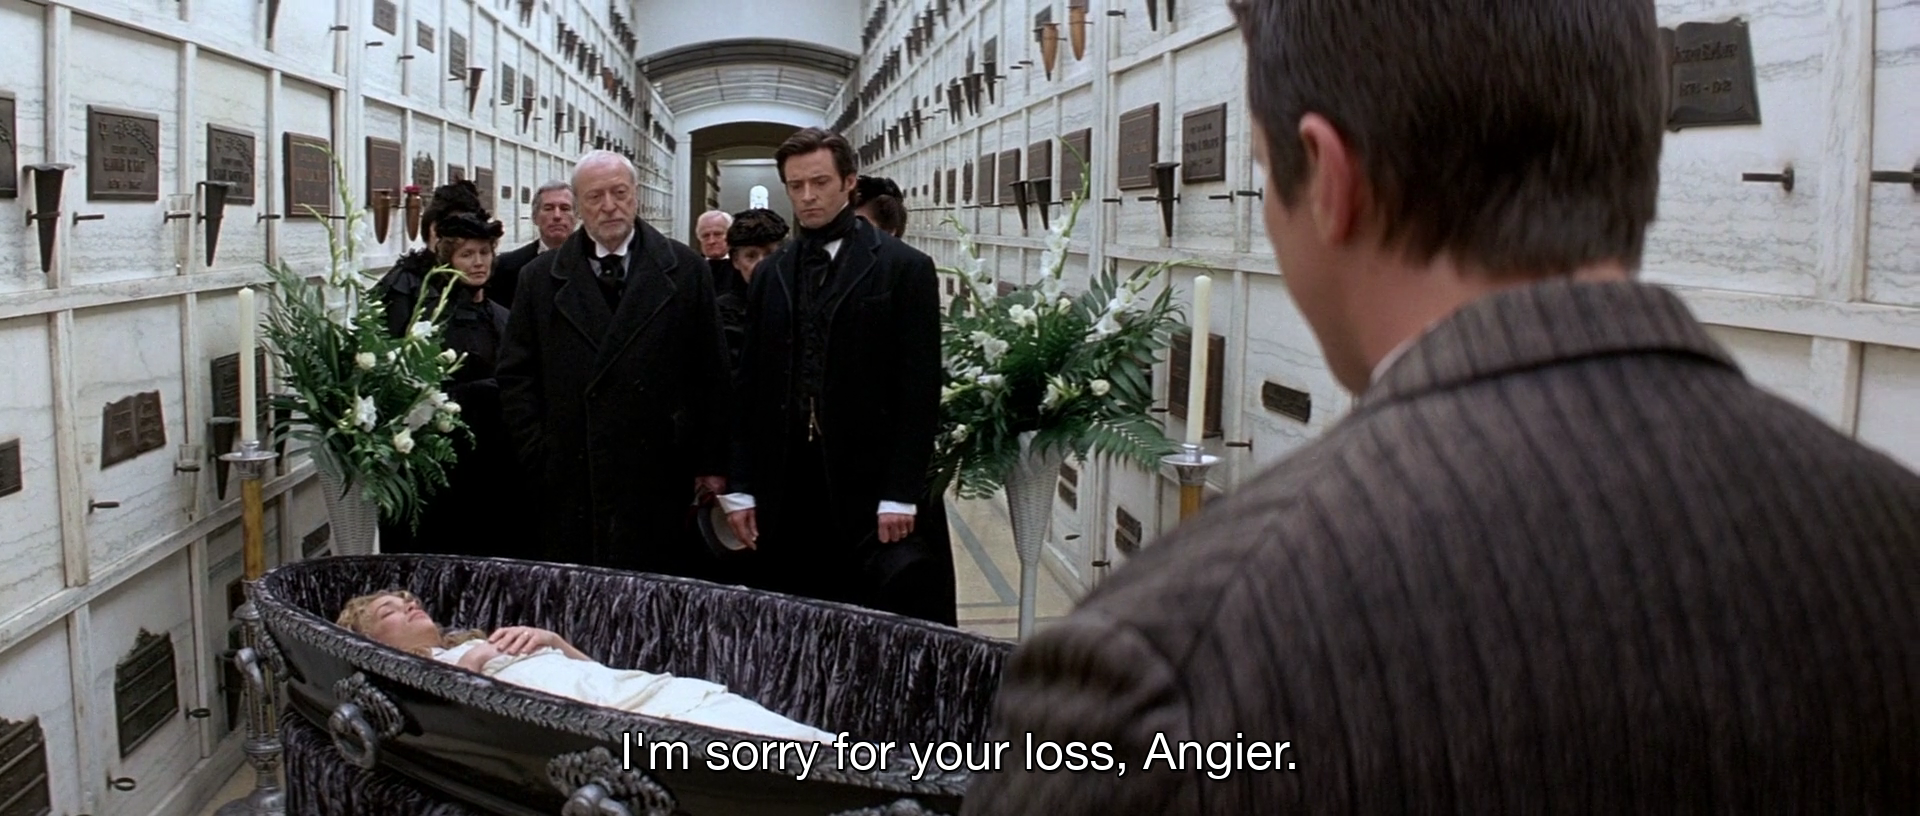 Funeral of Jackman's wife - The Prestige